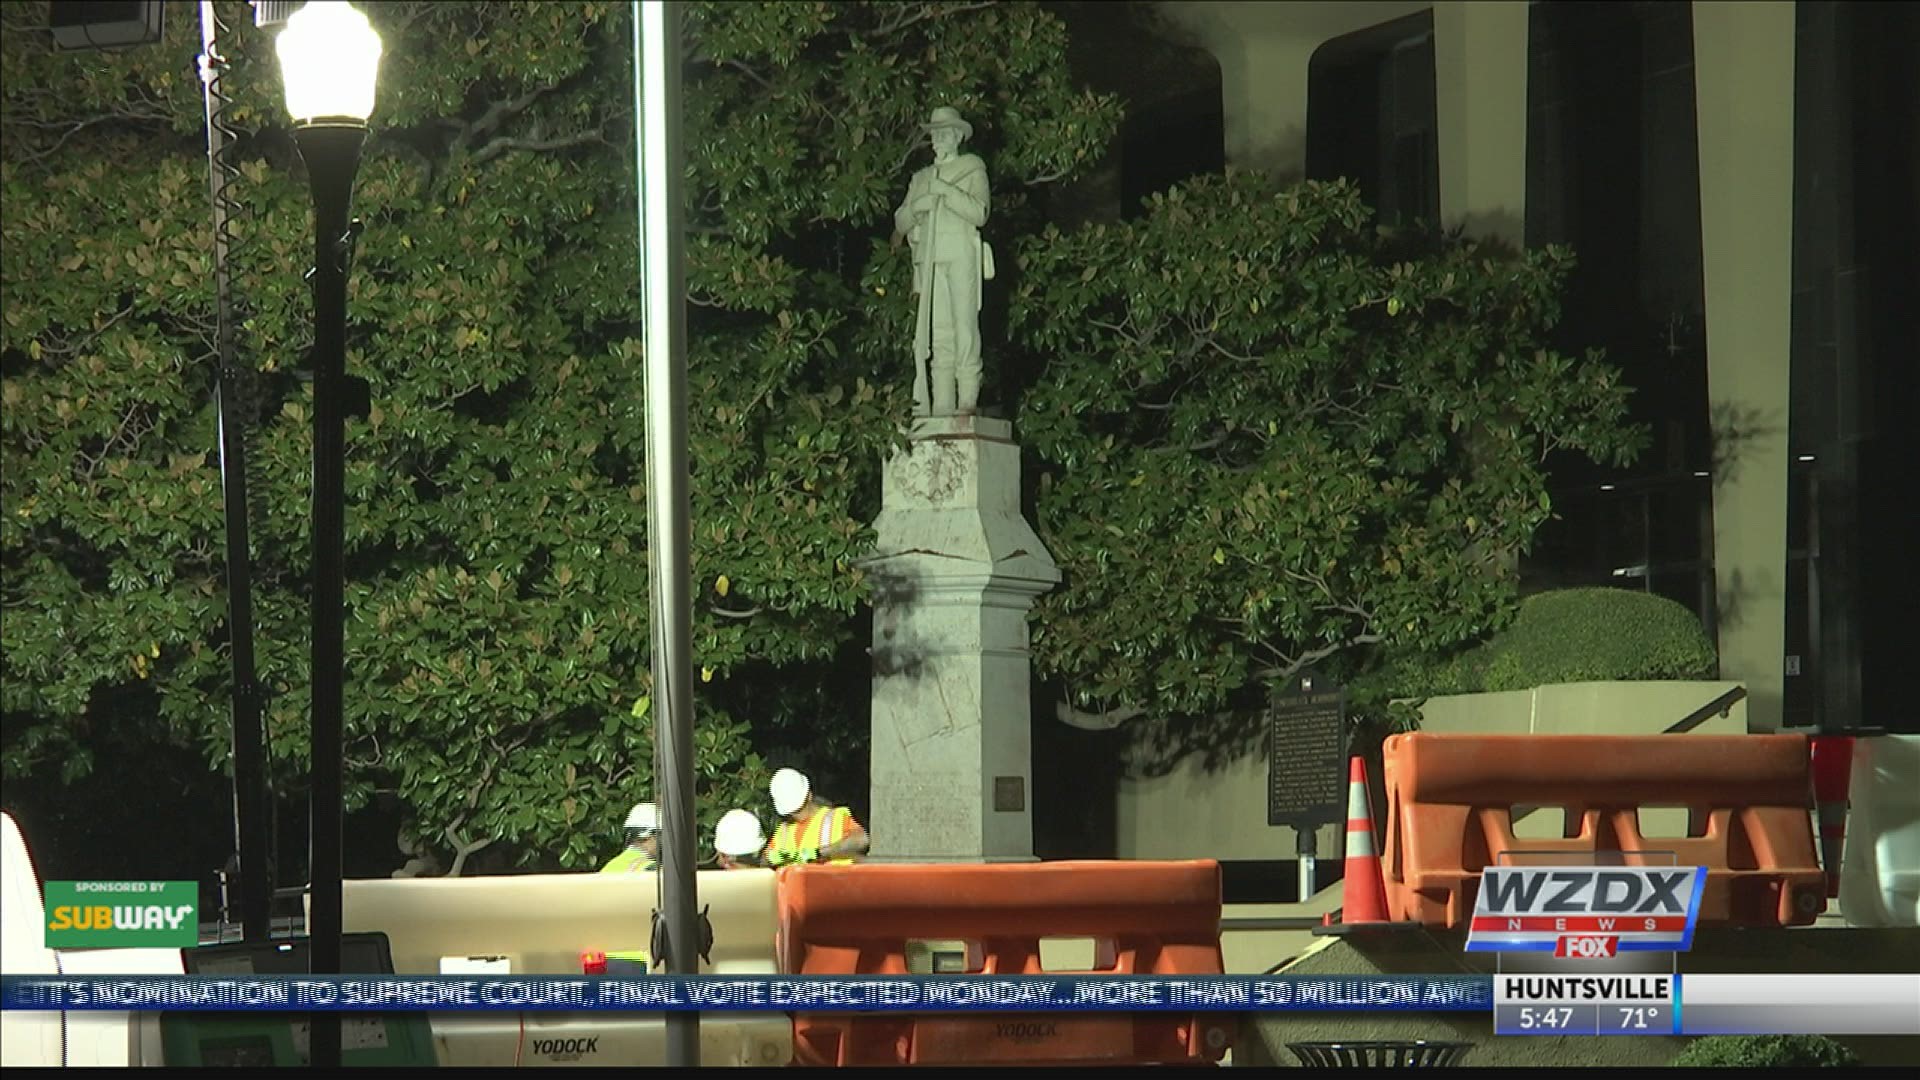 The Madison County Commission unanimously voted back in June to seek permission to remove the statue.